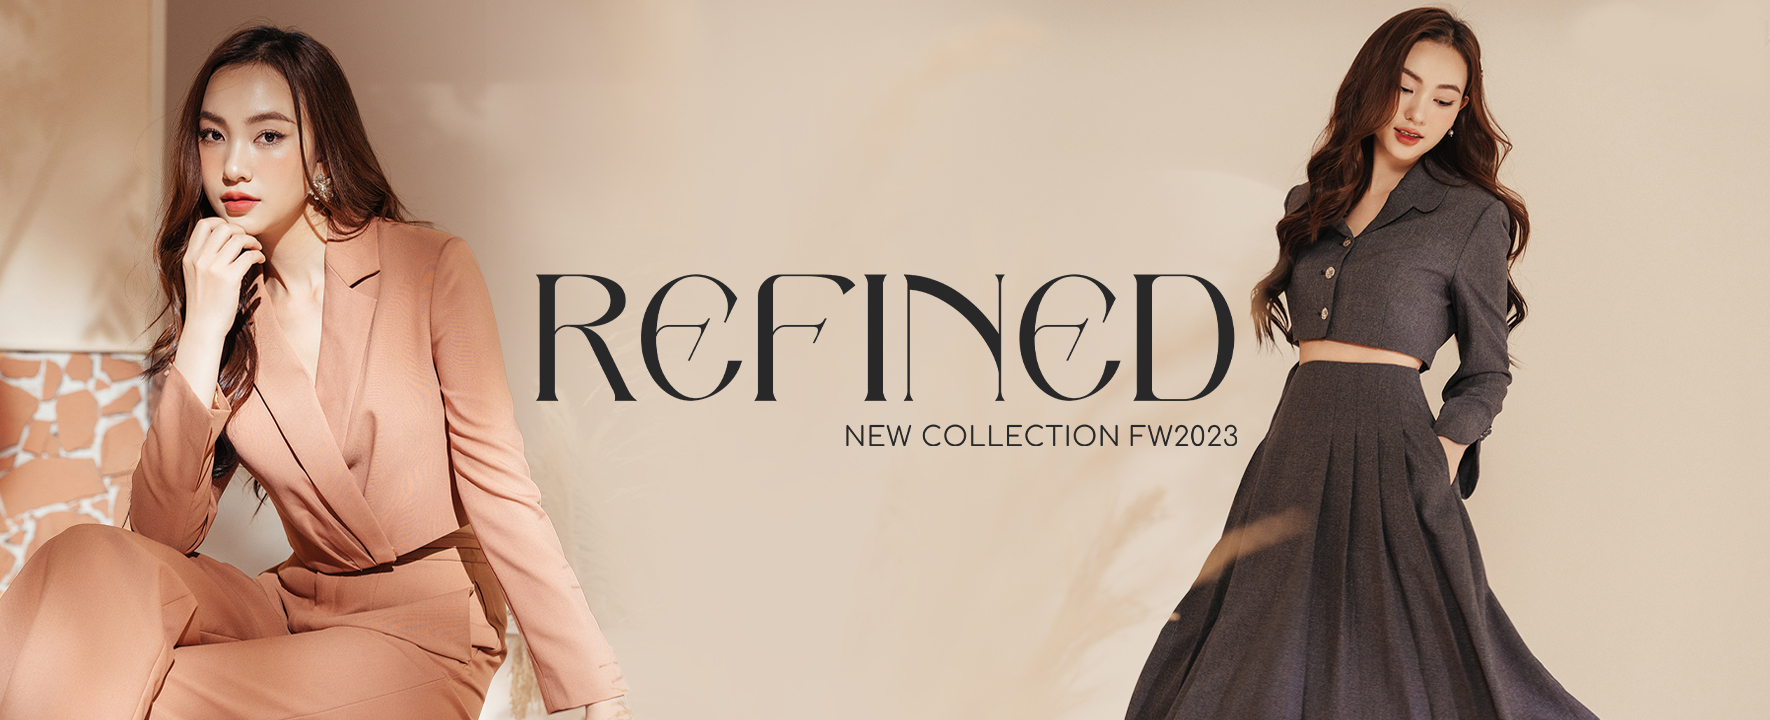 REFINED - NEW COLLECTION FW2023